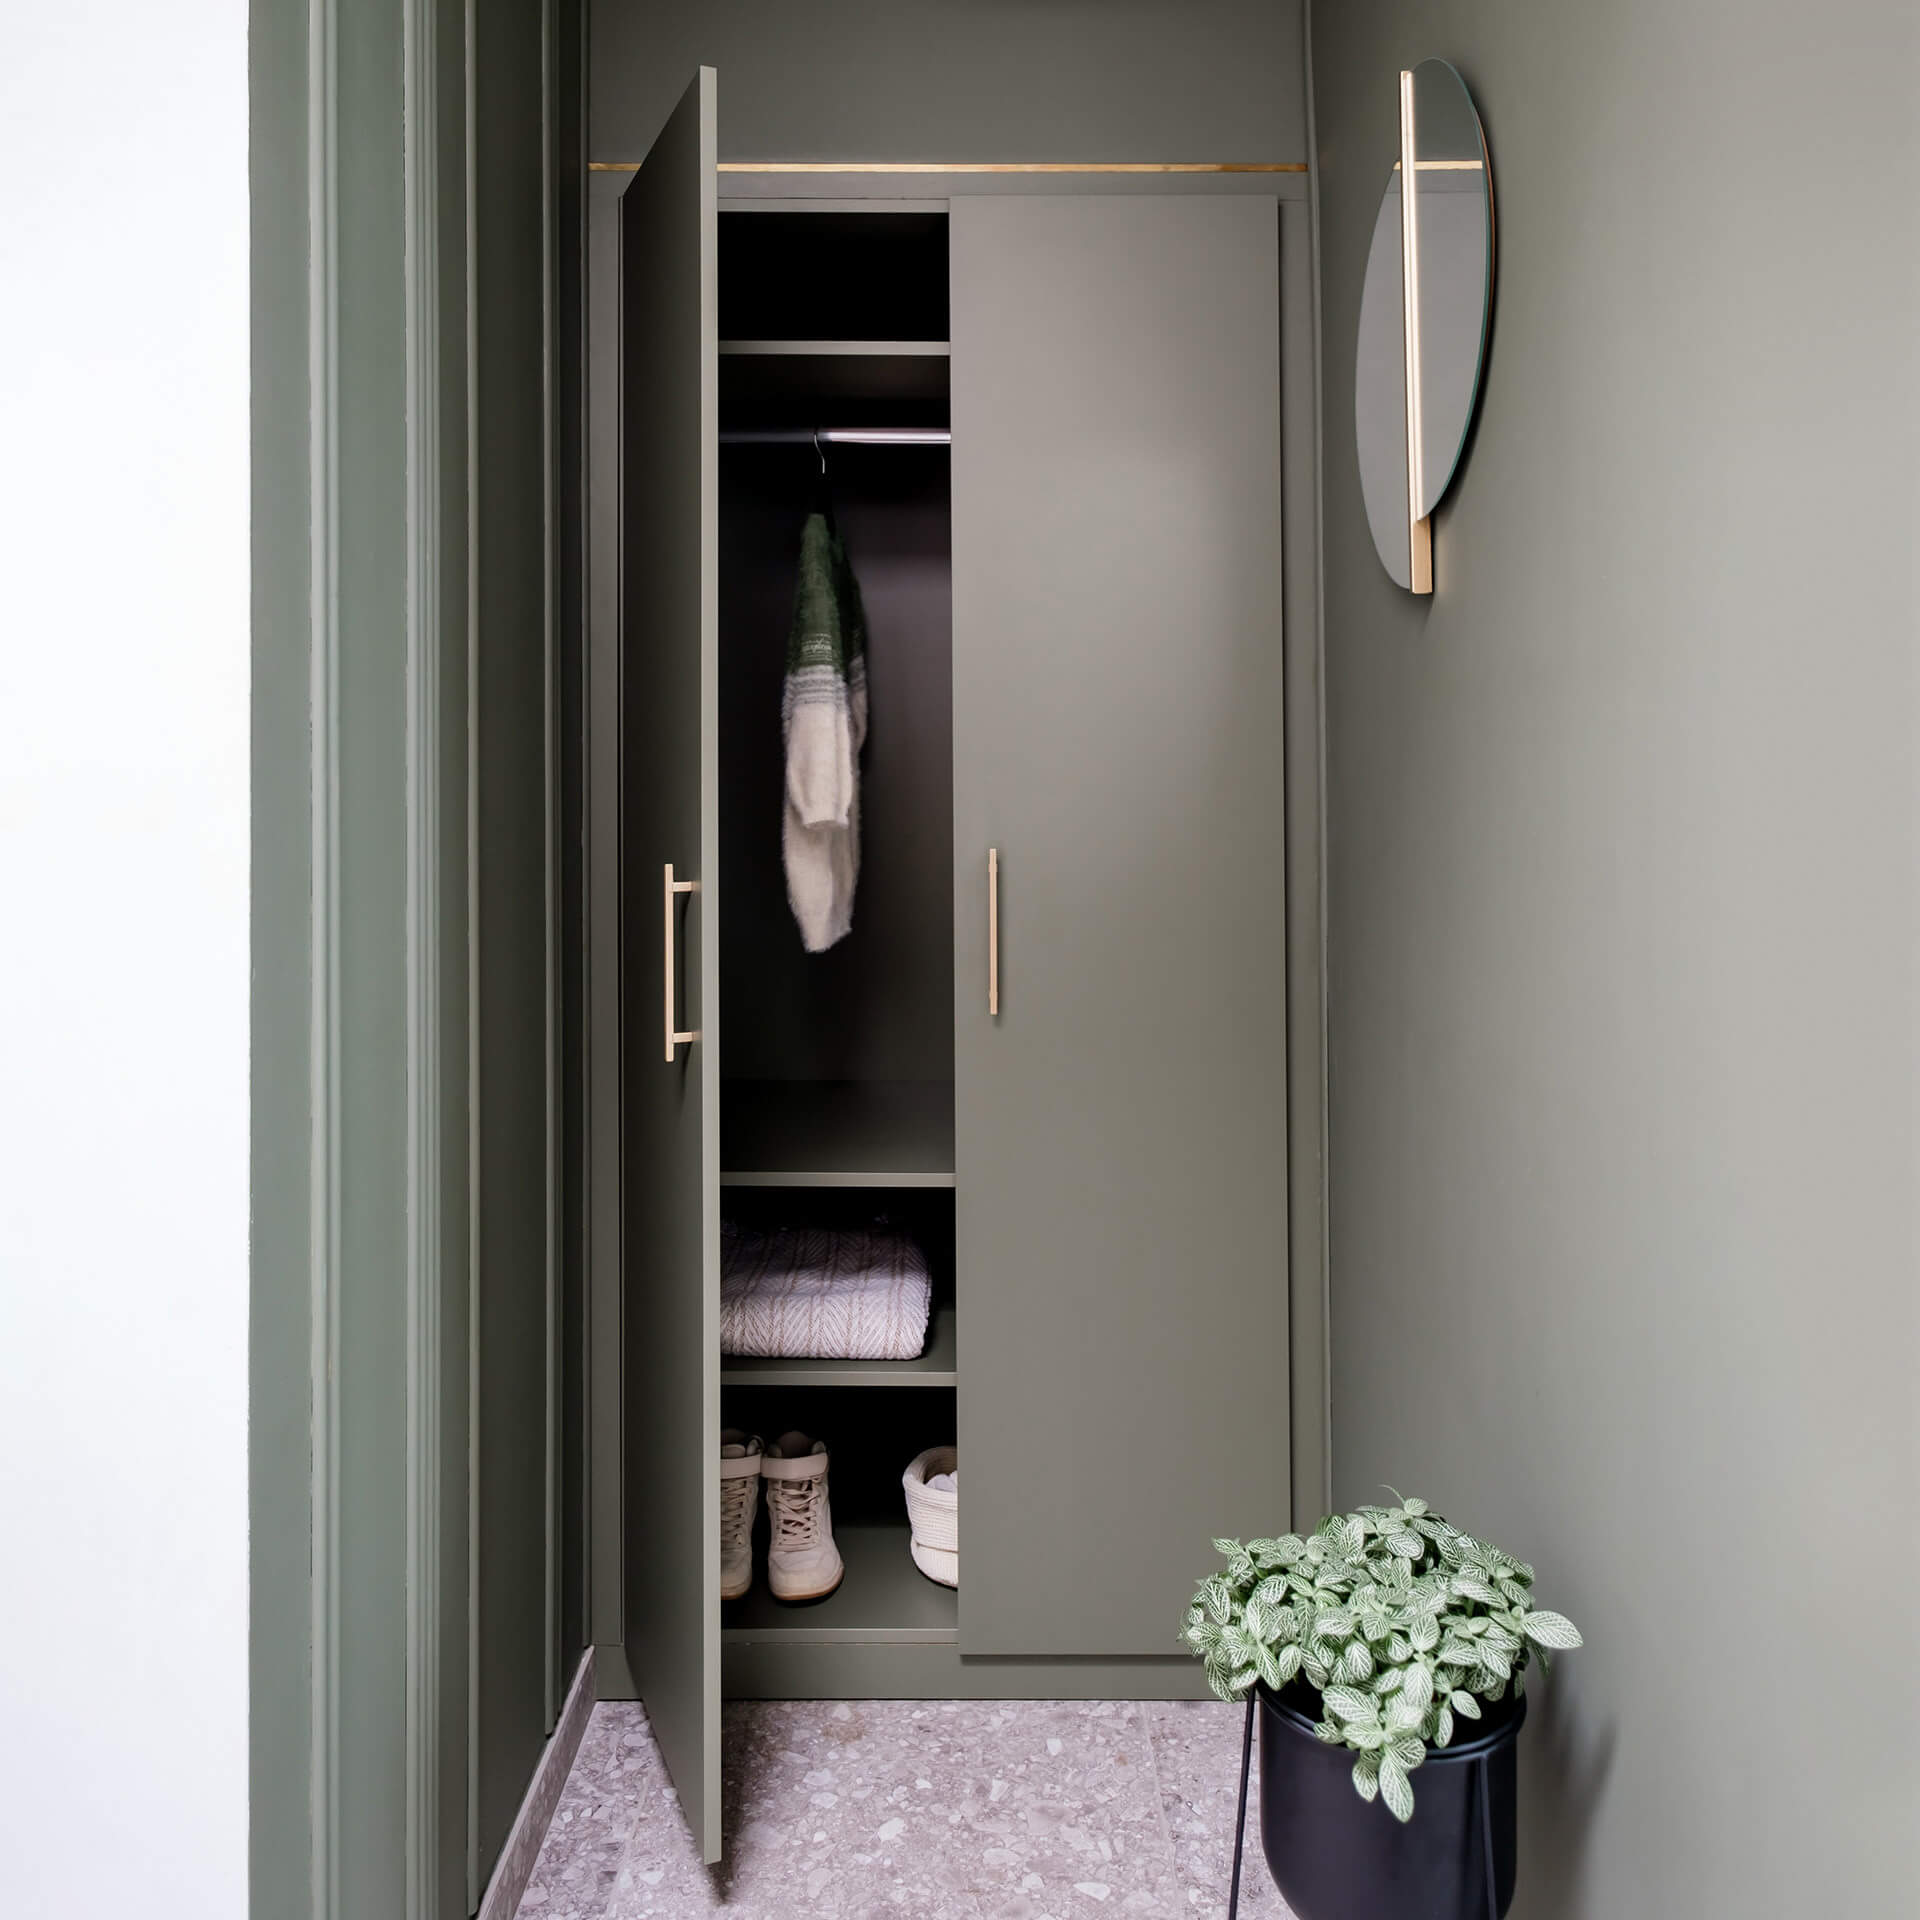 Green cabinet made to measure by maatkastenonline